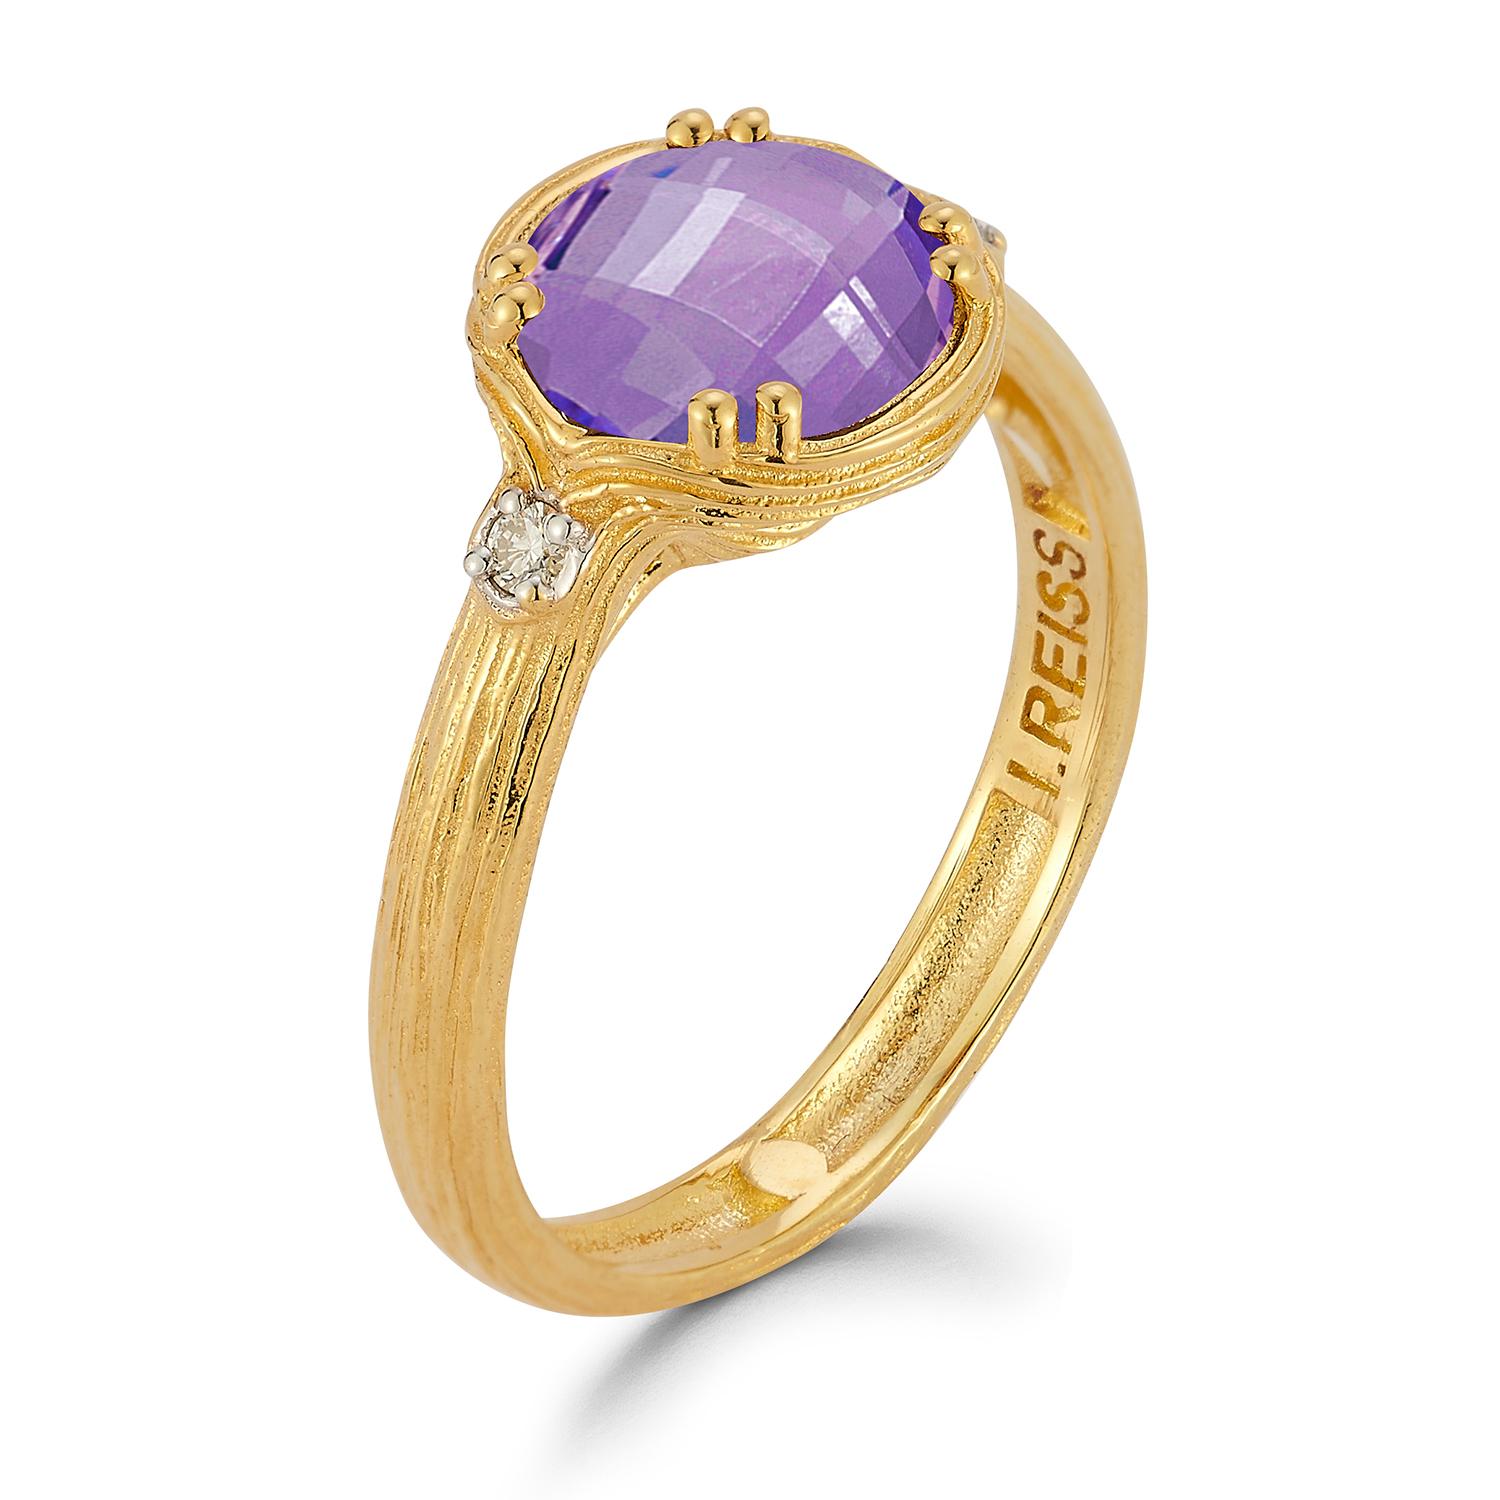 For Sale:  Hand-Crafted 14K Gold 0.05 ct. tw. Diamond & 1.75CT Amethyst Cocktail Ring 2